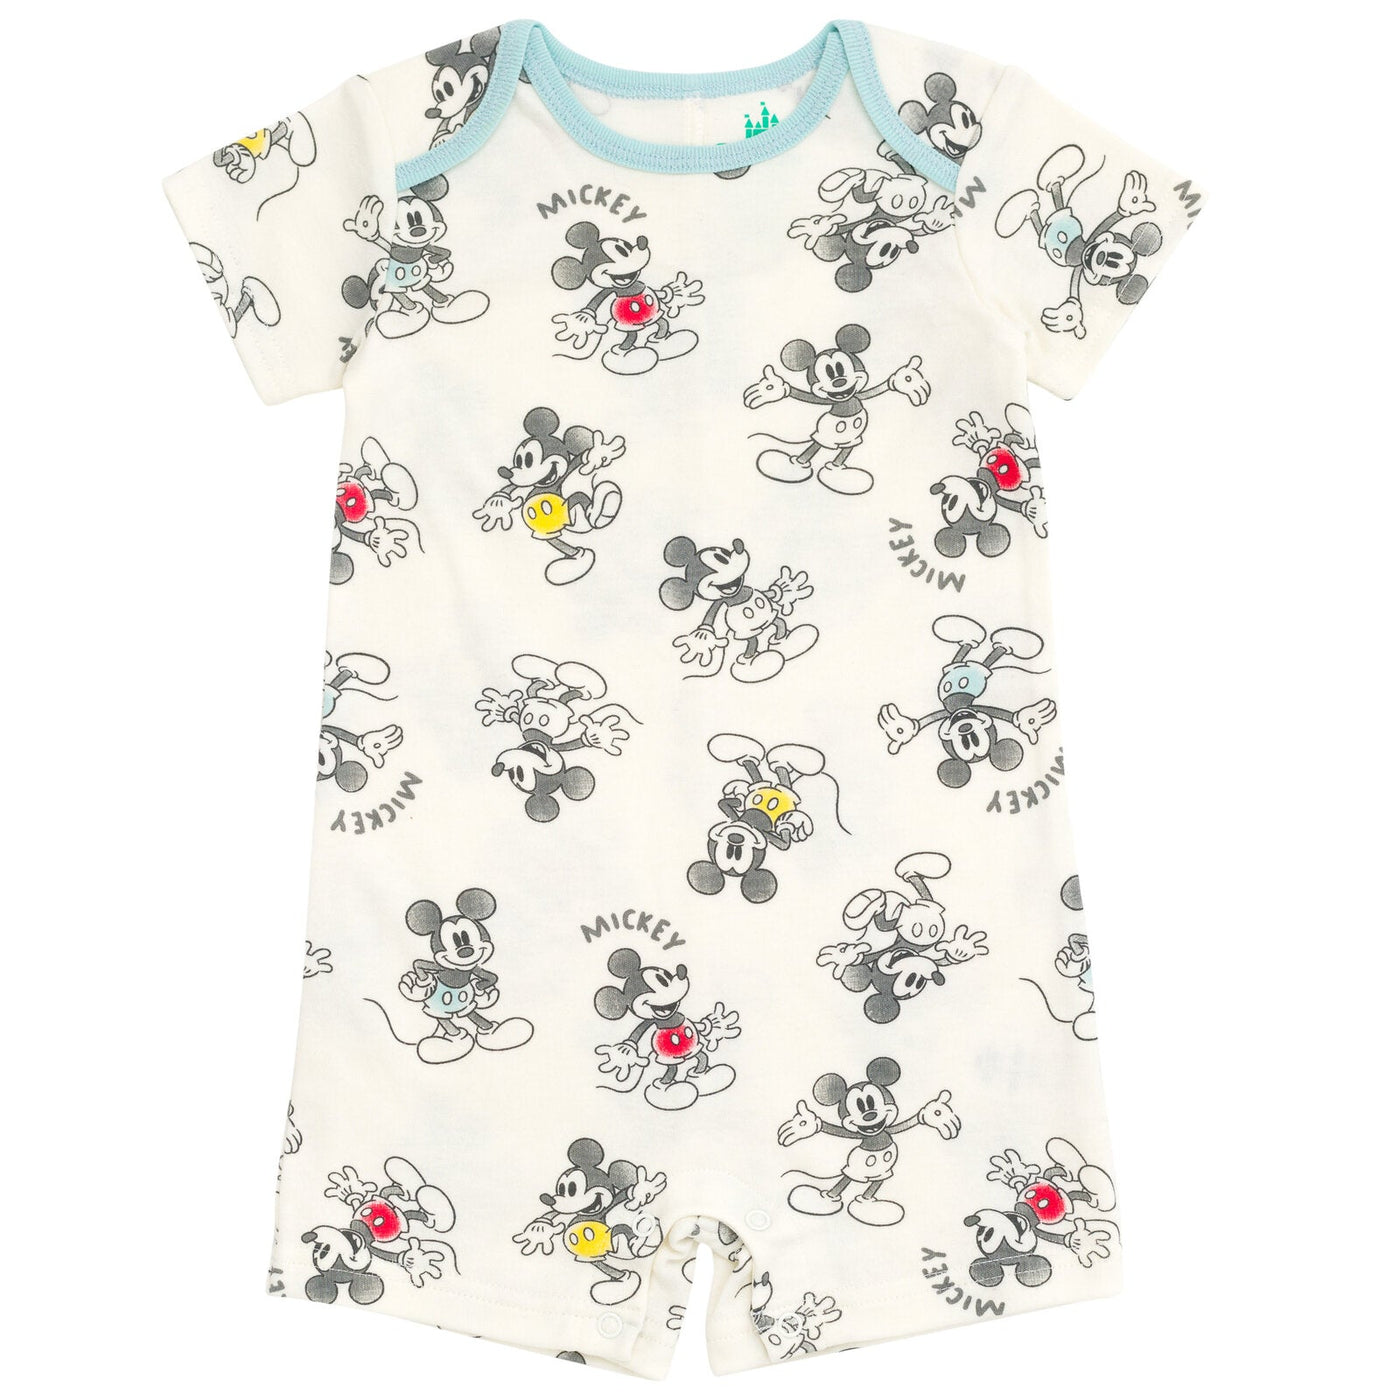 Disney Mickey Mouse 2 Pack Rompers - imagikids